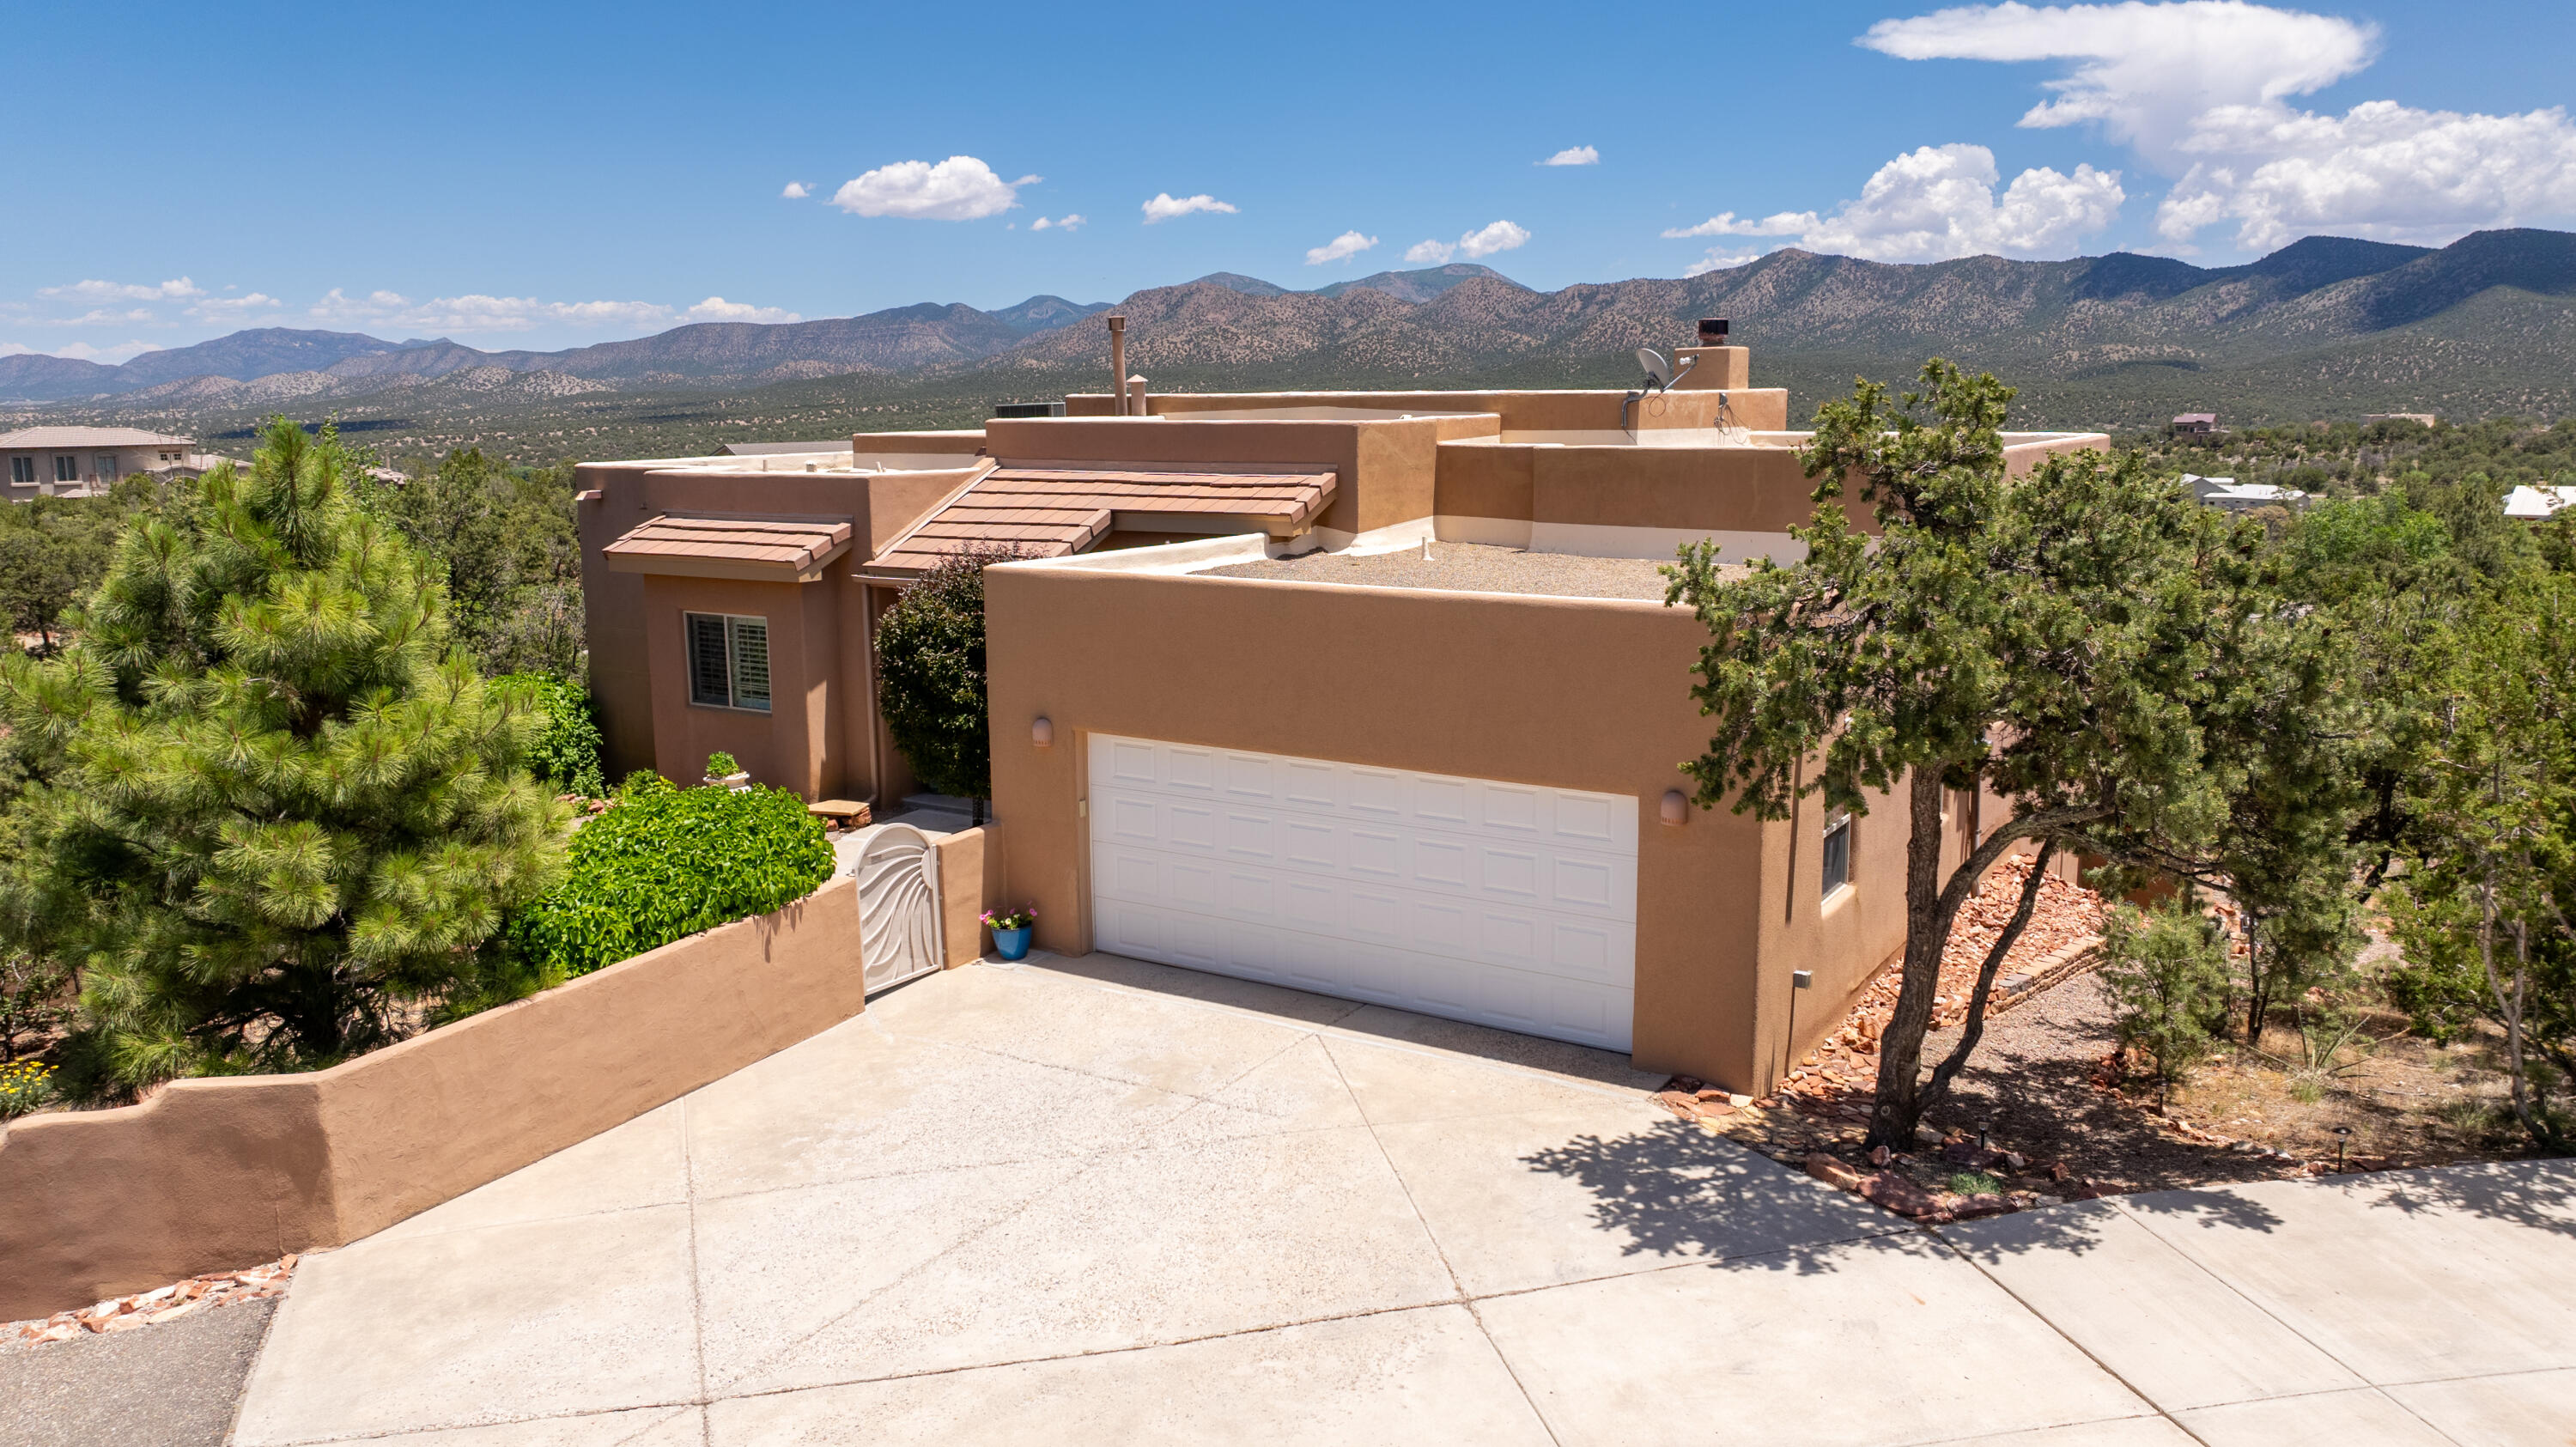 OPEN Houses FRI, 4-6 pm, SAT, 1-3 pm, SUN 2-4 pm.Stunning modern pueblo style home with surrounding mountain views. Tucked up on an elevated, wooded corner lot in the highly sought Paako golf community, this turnkey meticulously maintained home, boasts spectacular views off the wrap-around balcony. Lots of natural light with gleaming wood floors on the upper level & luxurious finishes throughout. Abundant space to host & spread out with 4 beds, 4 baths, plus offices on the main & lower levels, storage & living spaces on both floors. Potential for multigenerational living with separate entrance on lower level. Large RV Pad with electrical hook-up. Solar powered gate for privacy. Serene outdoor spaces with balcony surround. 20 mins to ABQ. Come experience mountain luxury living.